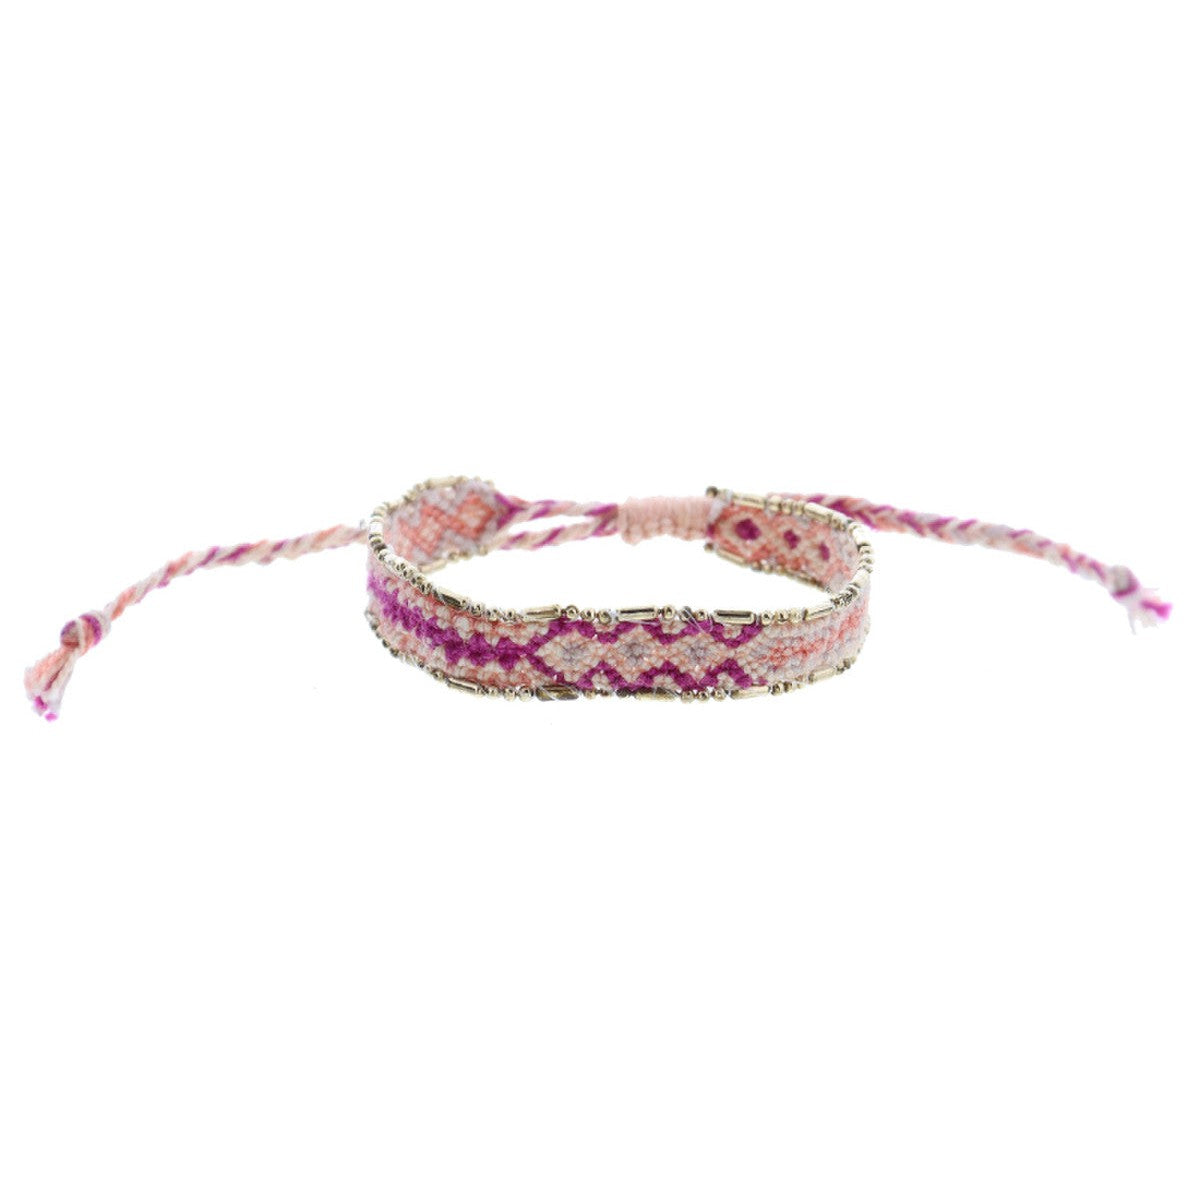 Jane Marie Kids Magenta, Peach, Coral Woven Band With Gold Accent Edge Bracelet-JANE MARIE-Little Giant Kidz